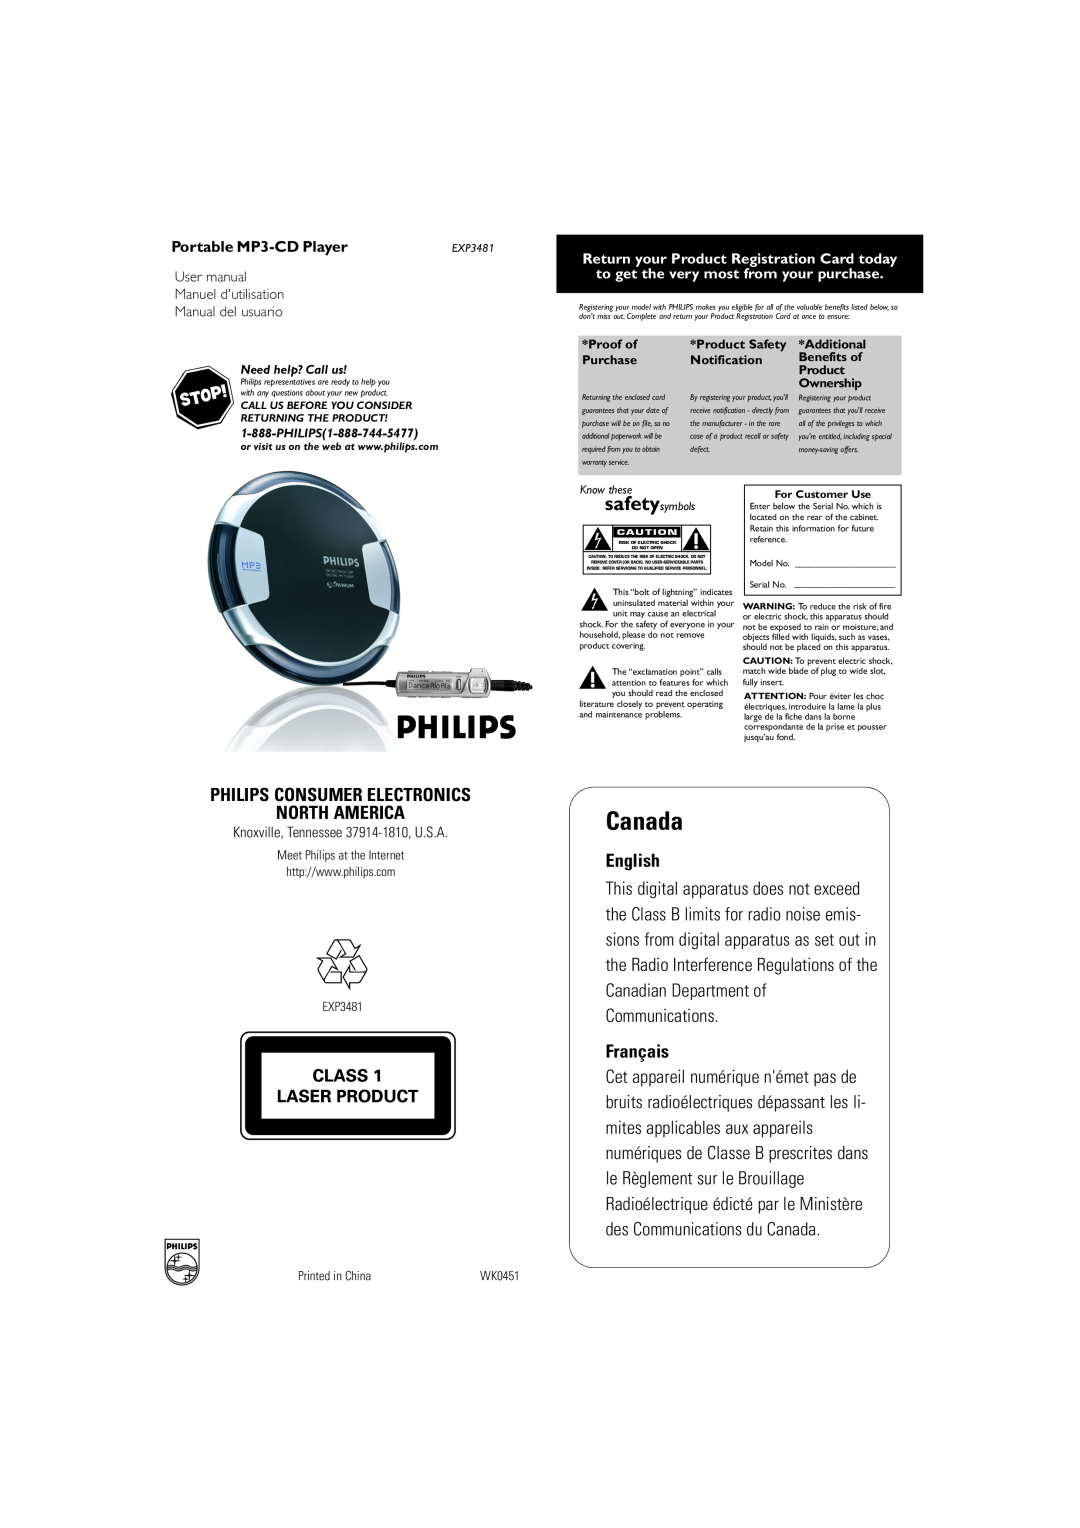 Philips EXP3483 user manual User manual Manuel dutilisation Manual del usuario, Knoxville, Tennessee 37914-1810, U.S.A 